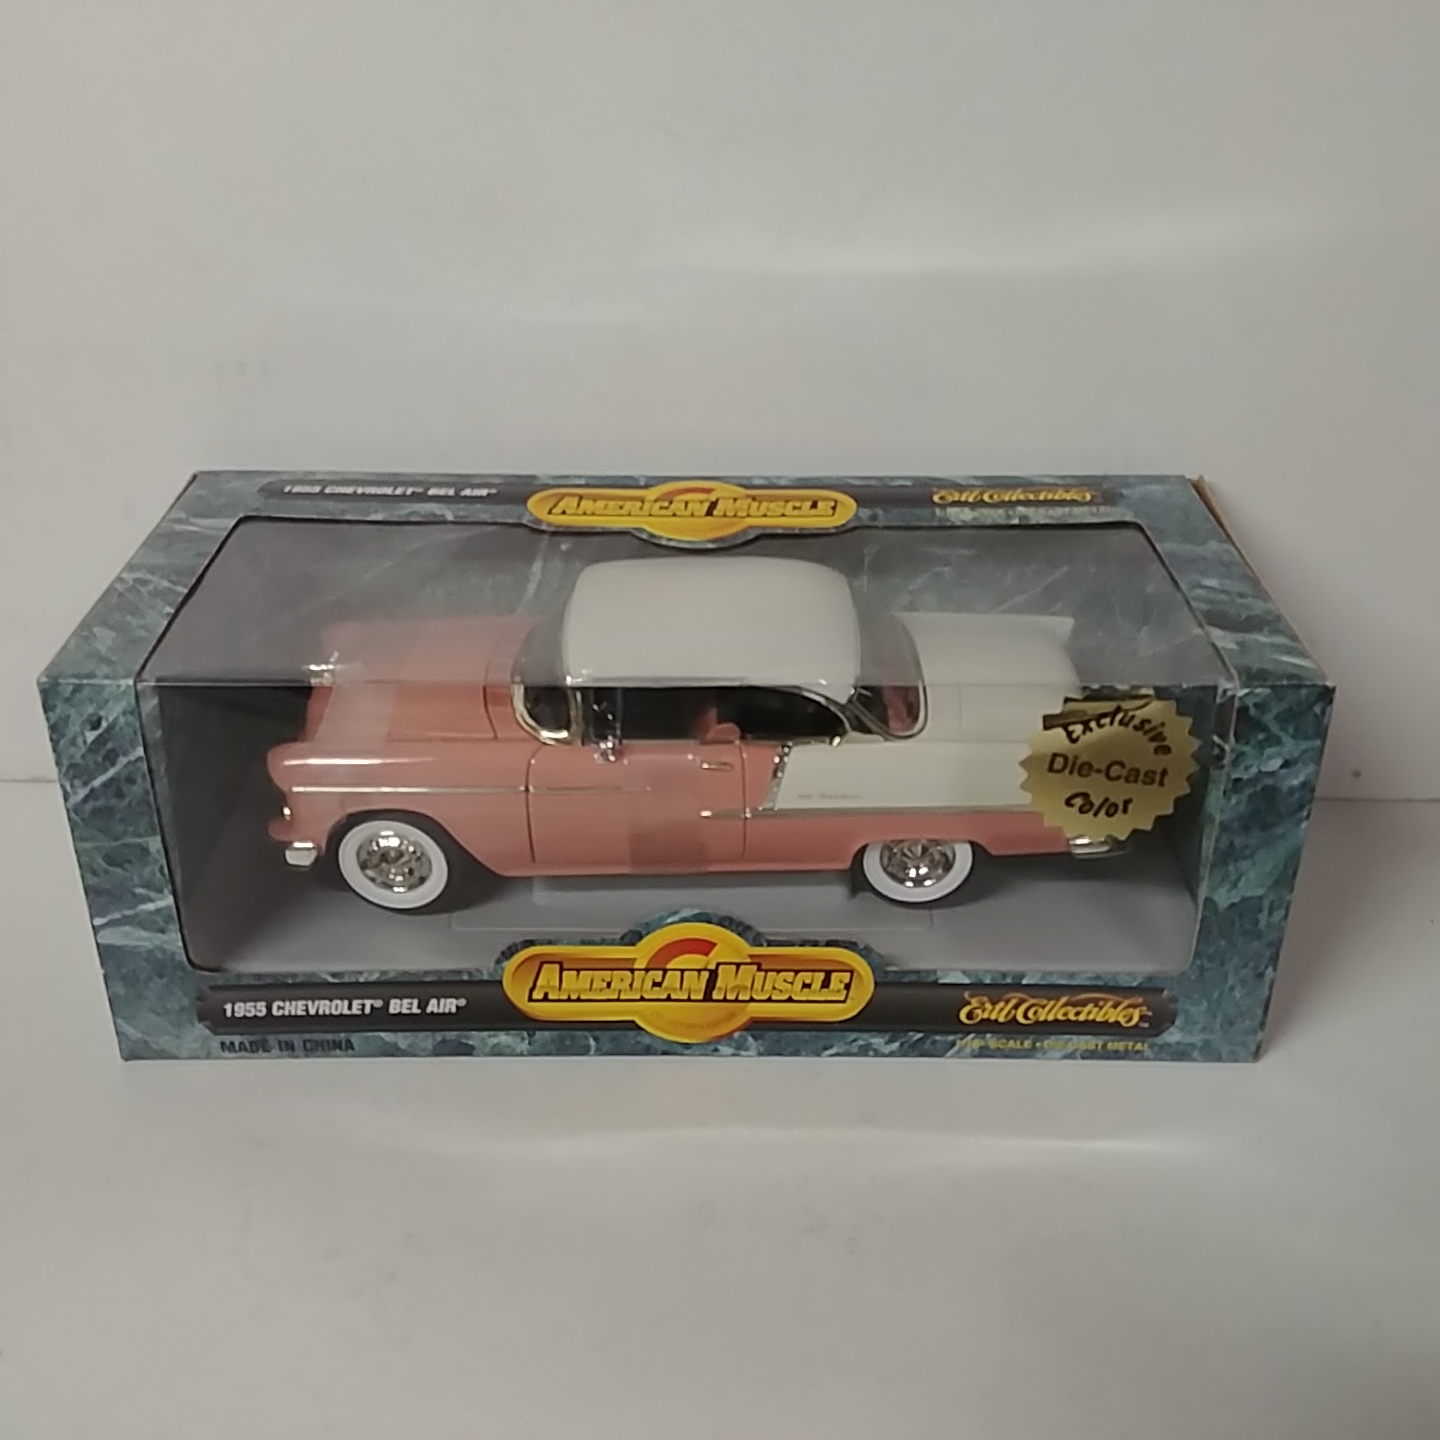 1955 Chevrolet 1/18th Bel Air Pink and White